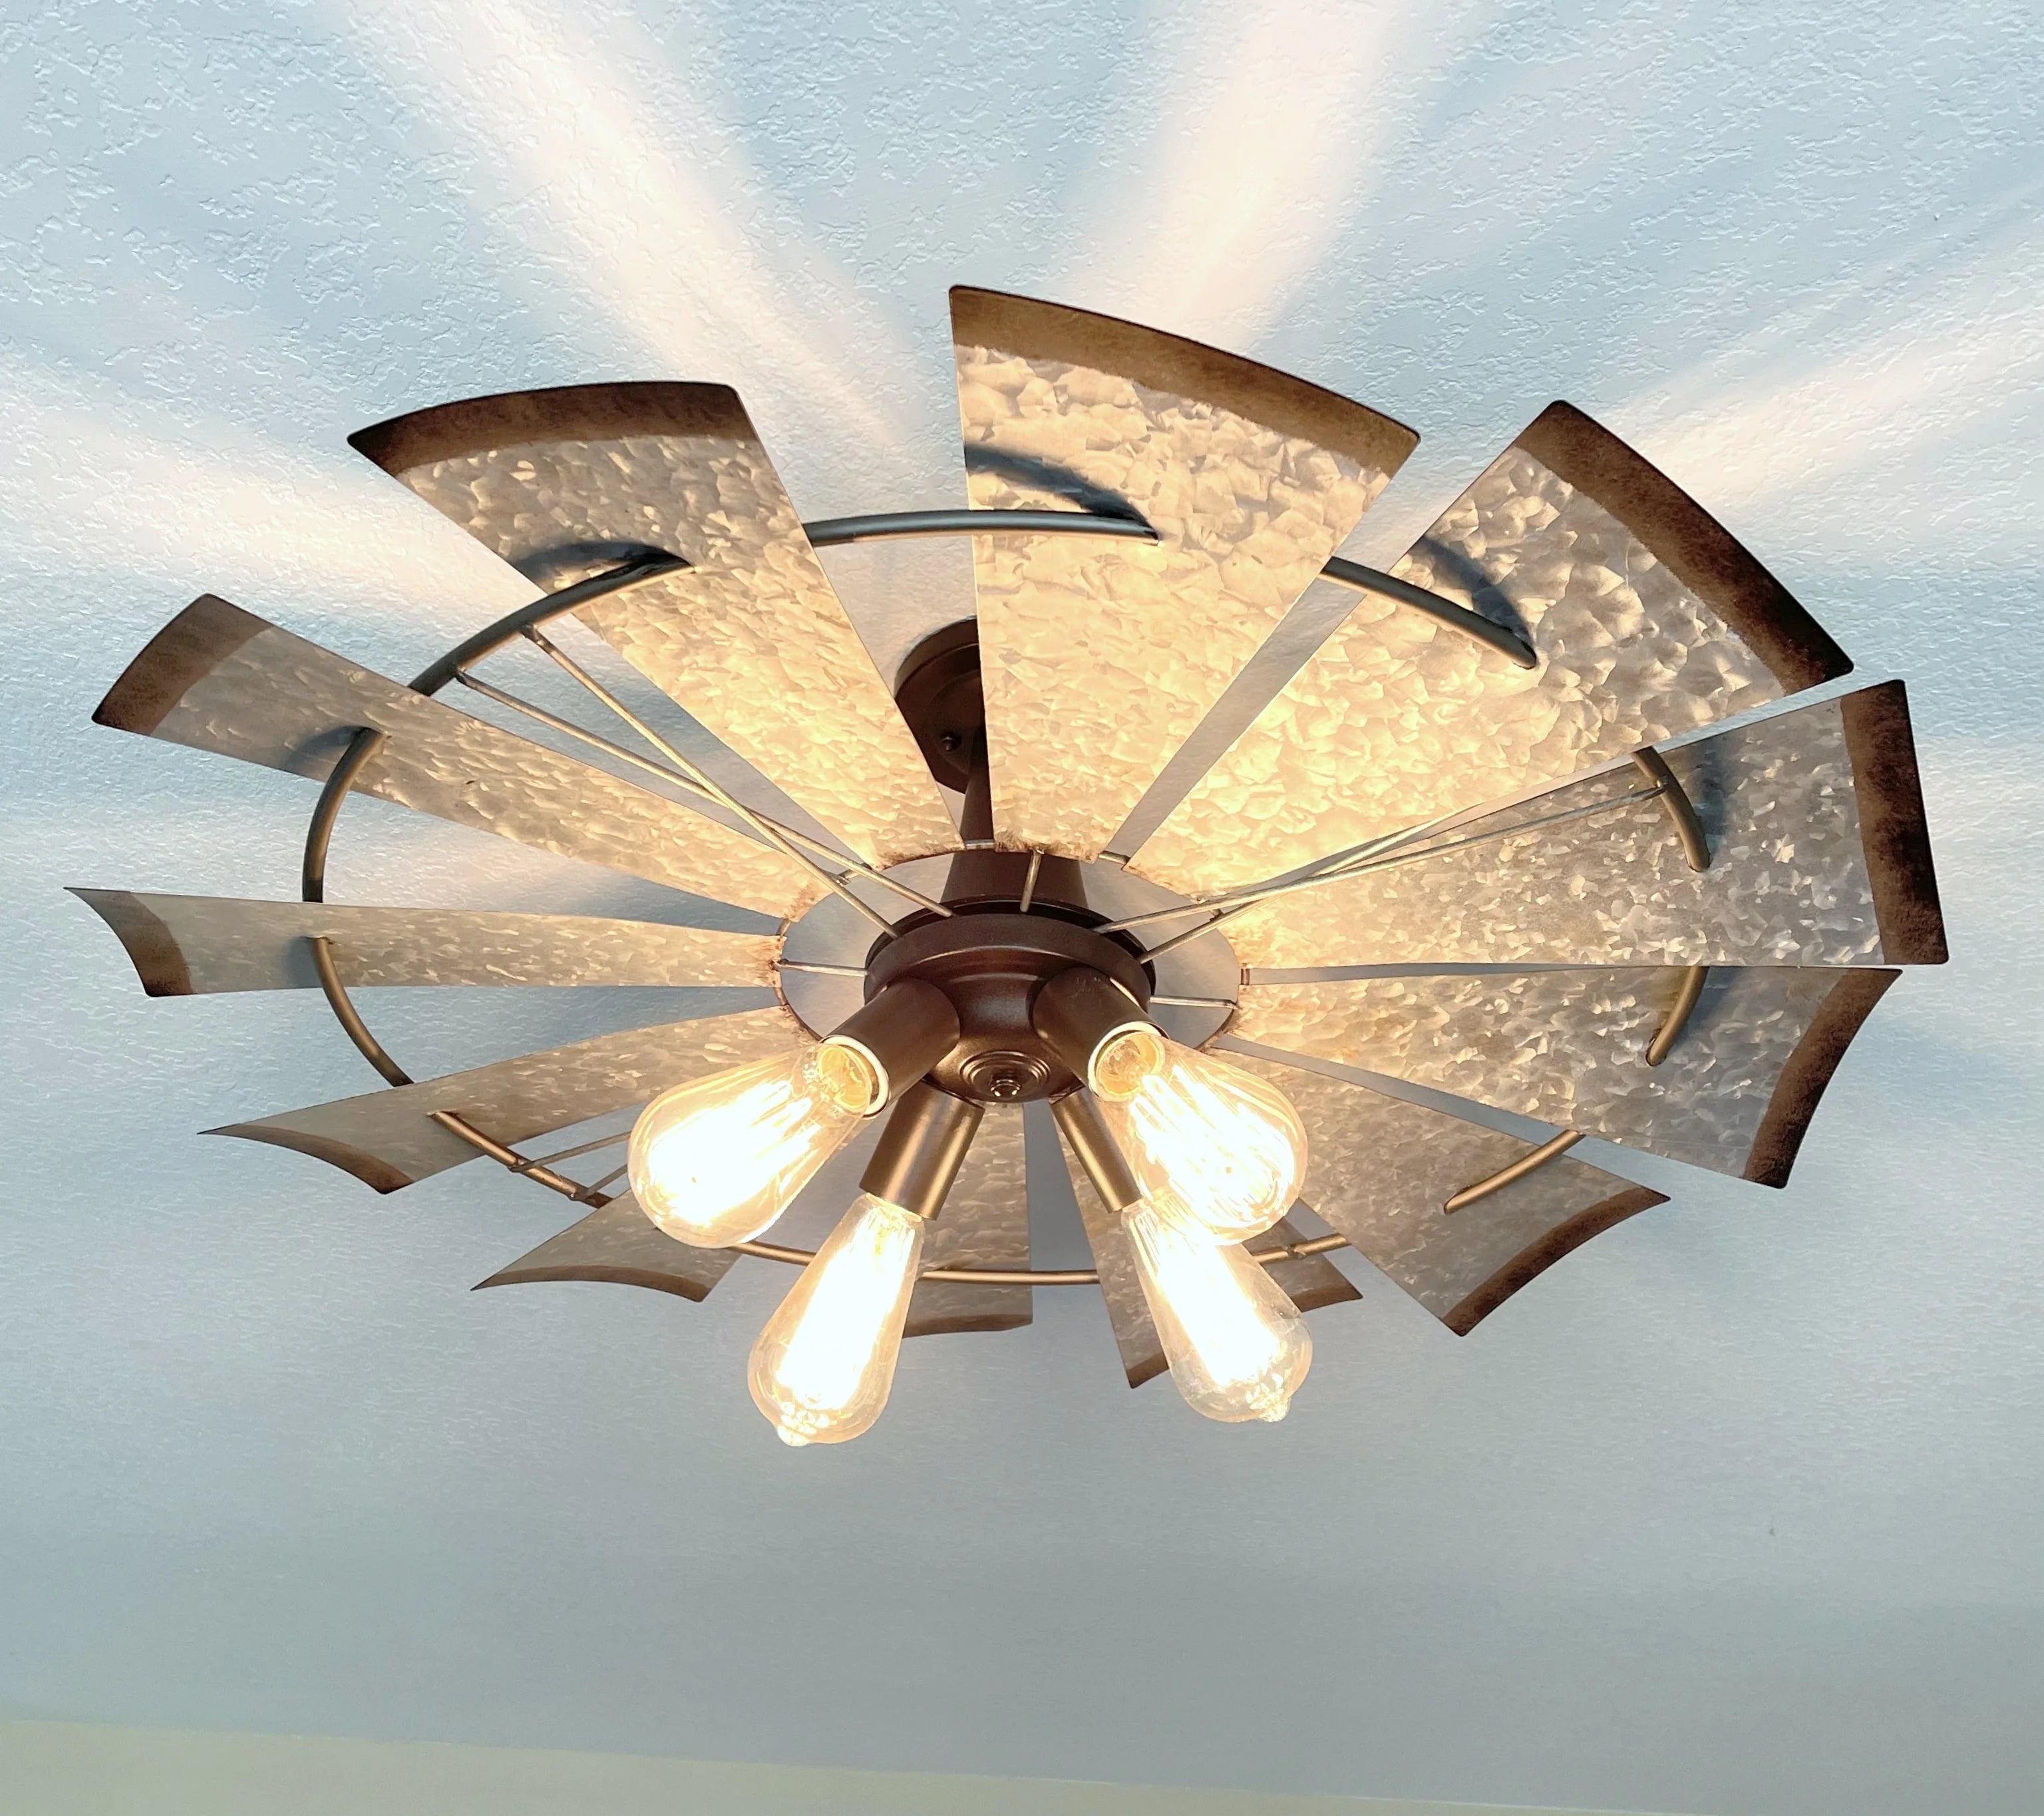 Windmill Farmhouse Chandelier Lighting As Ceiling Fan Looking Fixtures The Lamp Goods